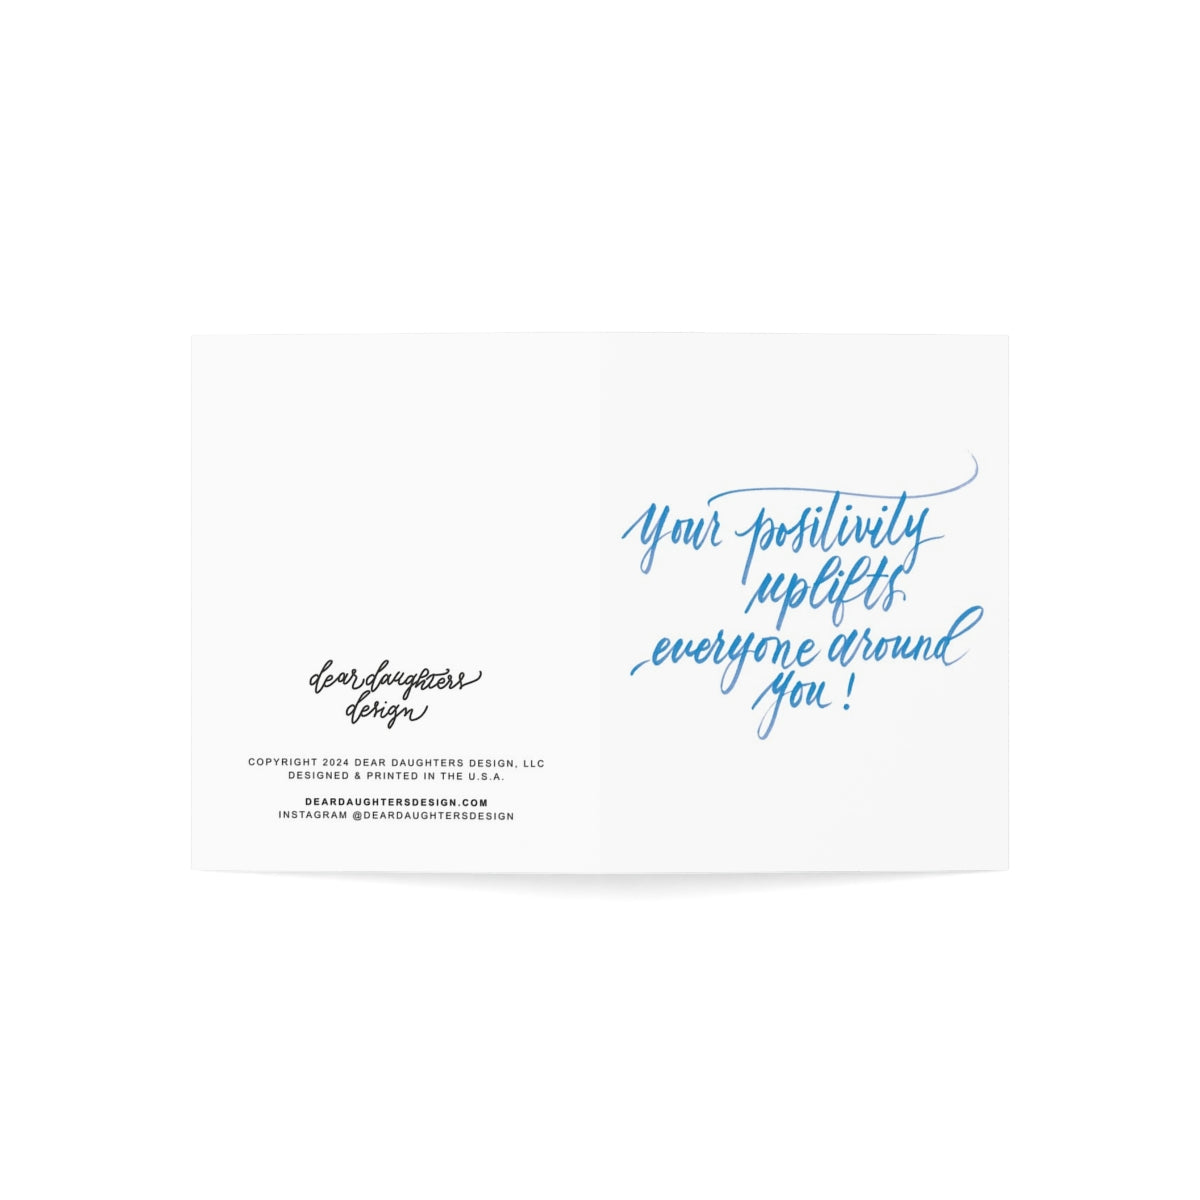 "Your positivity uplifts everyone around you!" Blue Thank You Greeting Card - Gratitude #09